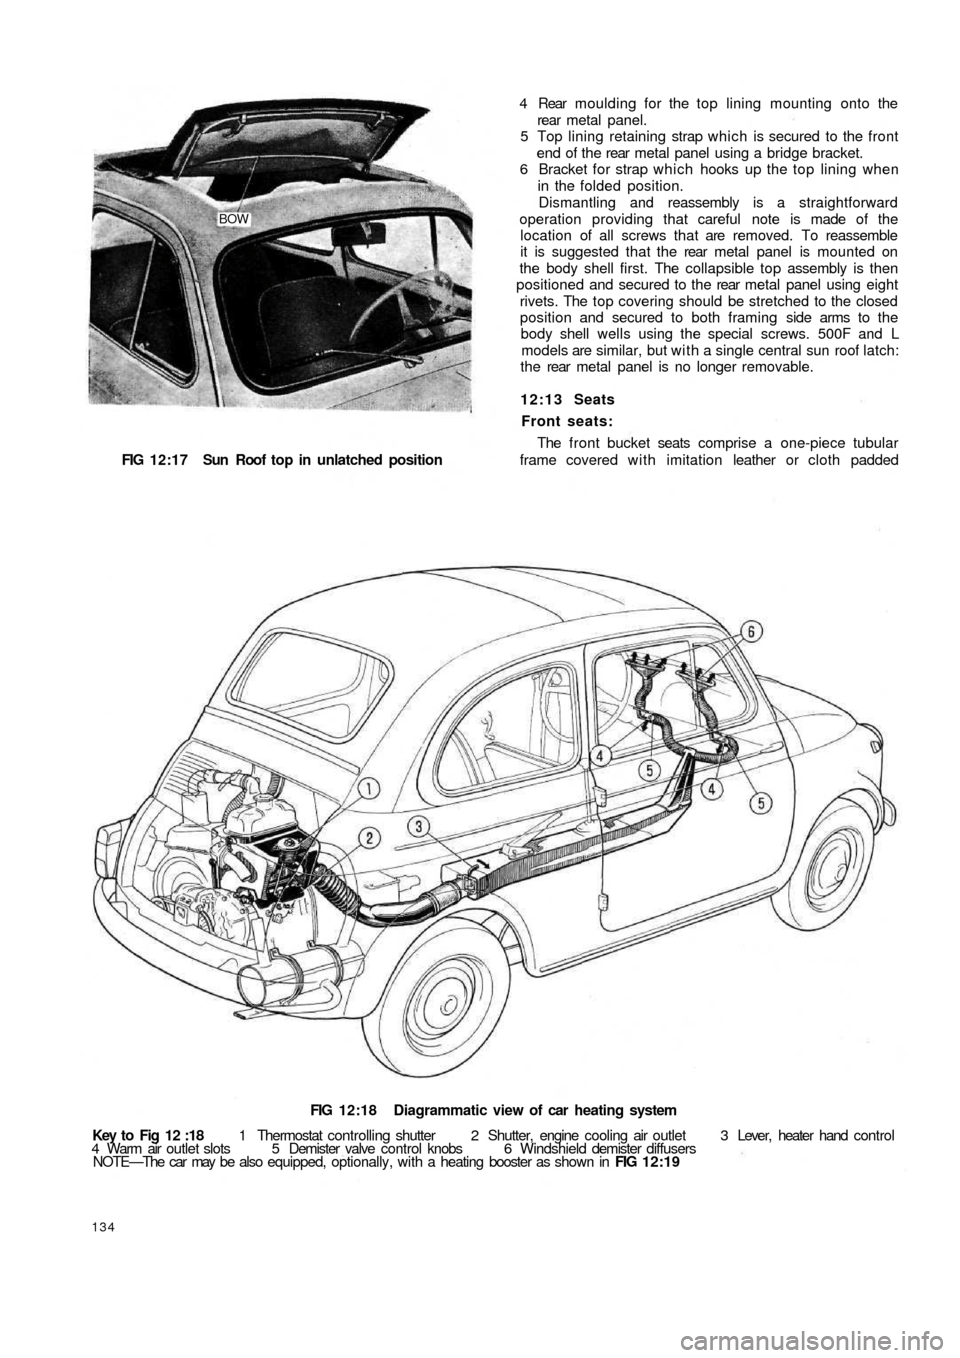 FIAT 500 1960 1.G Repair Manual BOW
FIG 12:17  Sun Roof  top   in  unlatched position
FIG 12:18 Diagrammatic view of car heating system
Key to Fig 12 :18 1 Thermostat controlling shutter  2  Shutter,  engine  cooling air outlet  3 L